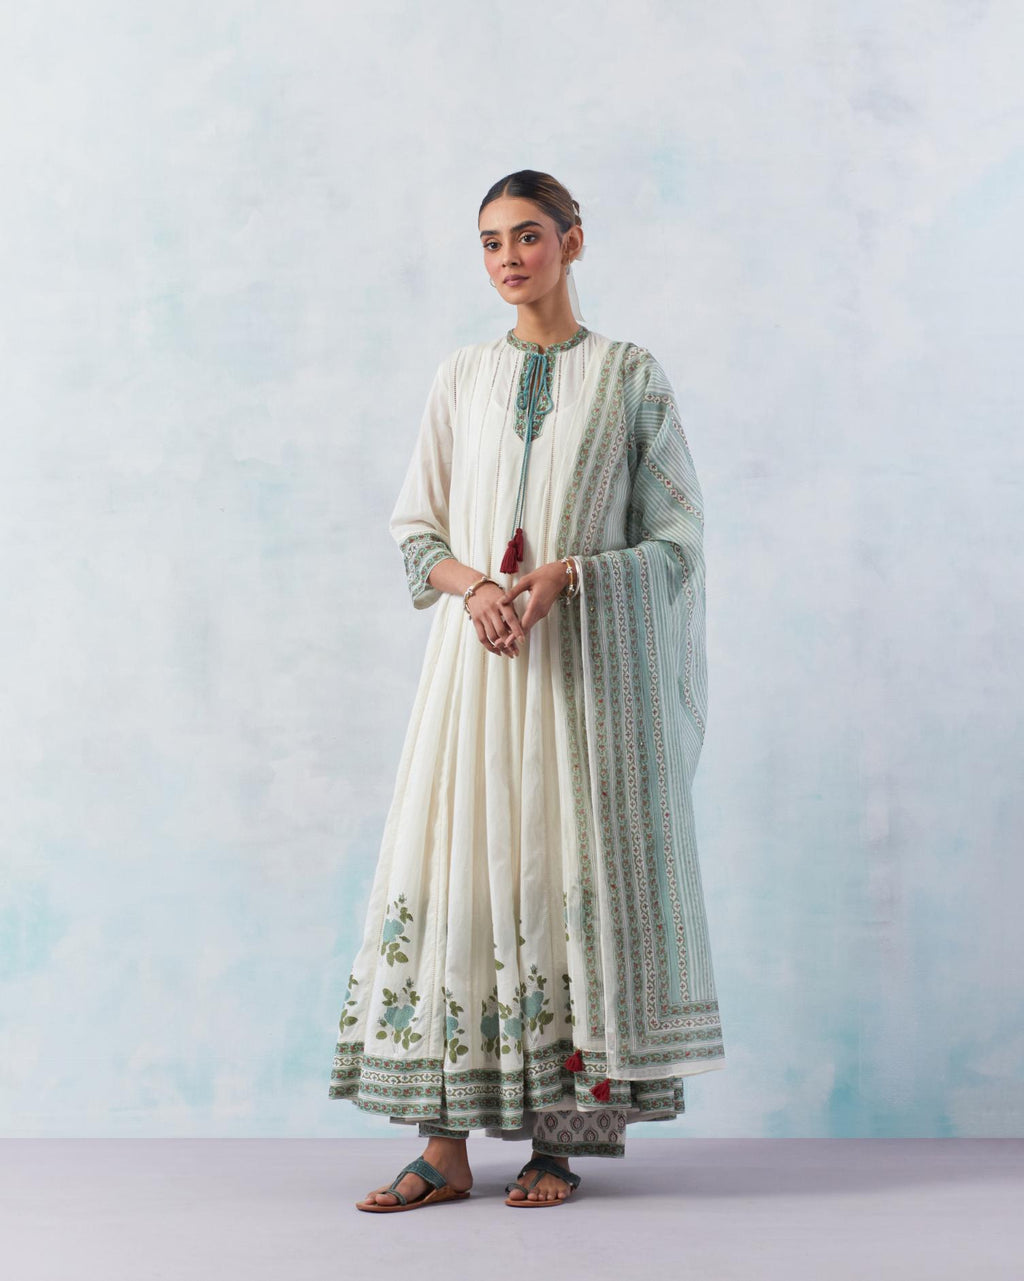 Off white cotton hand block printed multi-paneled kurta dress set with 3/4 sleeves and ladder lace detailing at all panels.